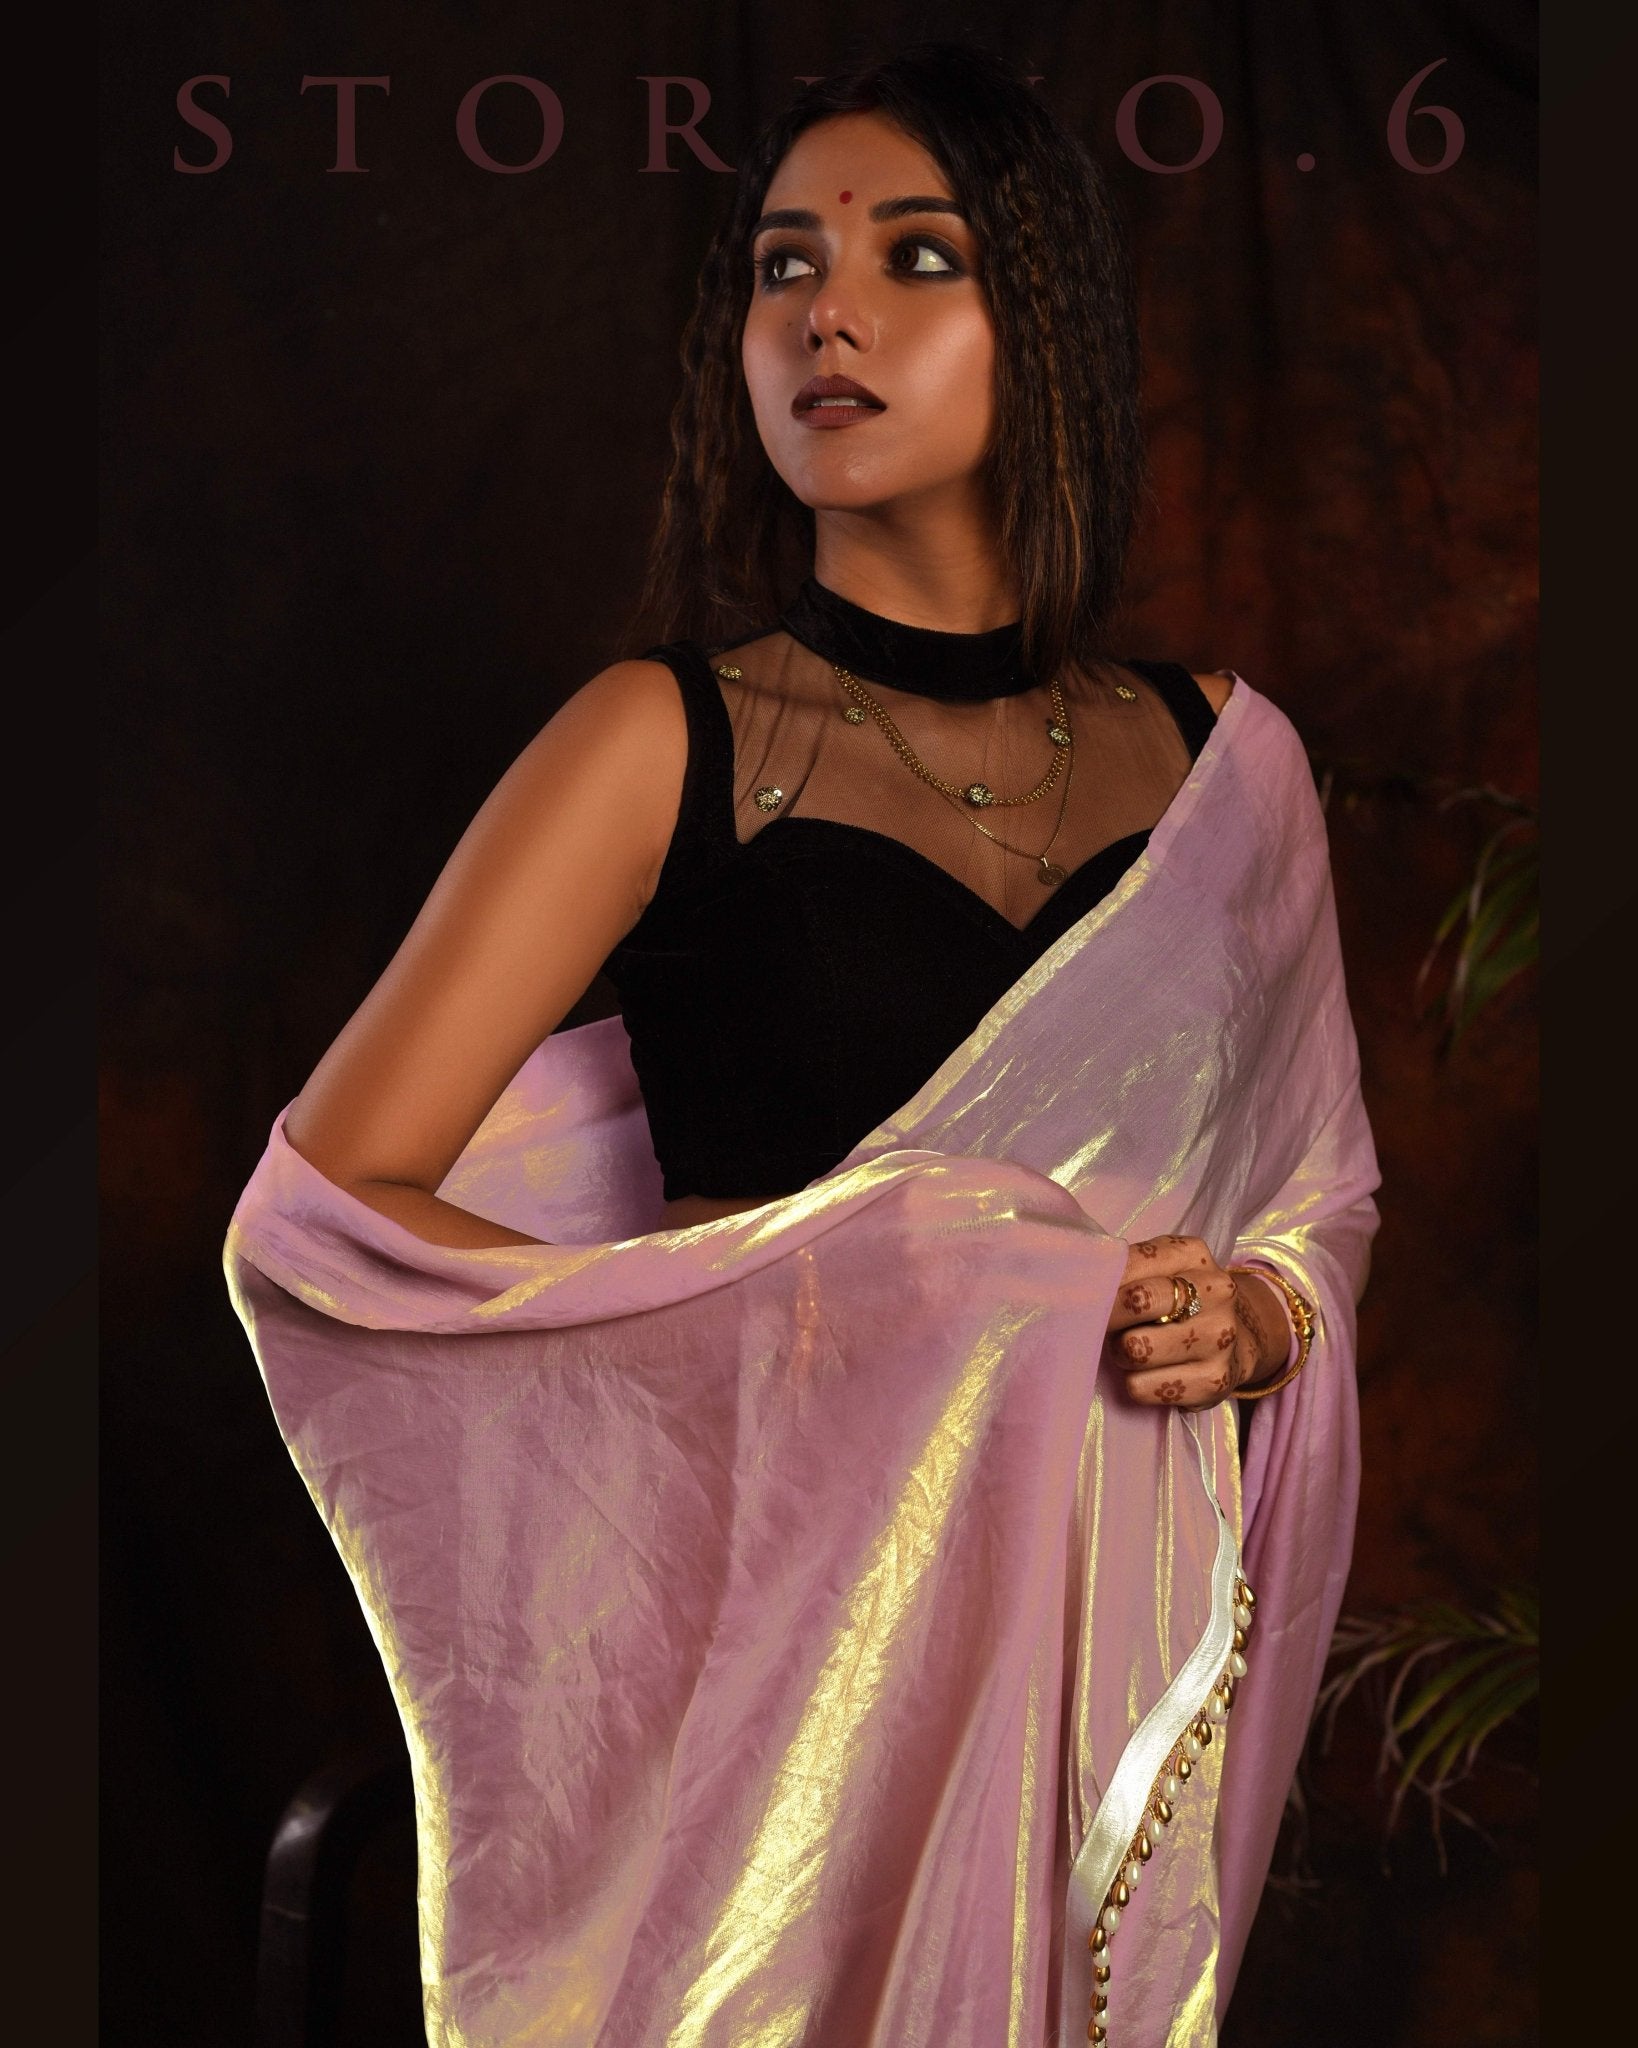 THE YOU MADE ME BLUSH SAREE WITH GOSSIP GIRL BLOUSE